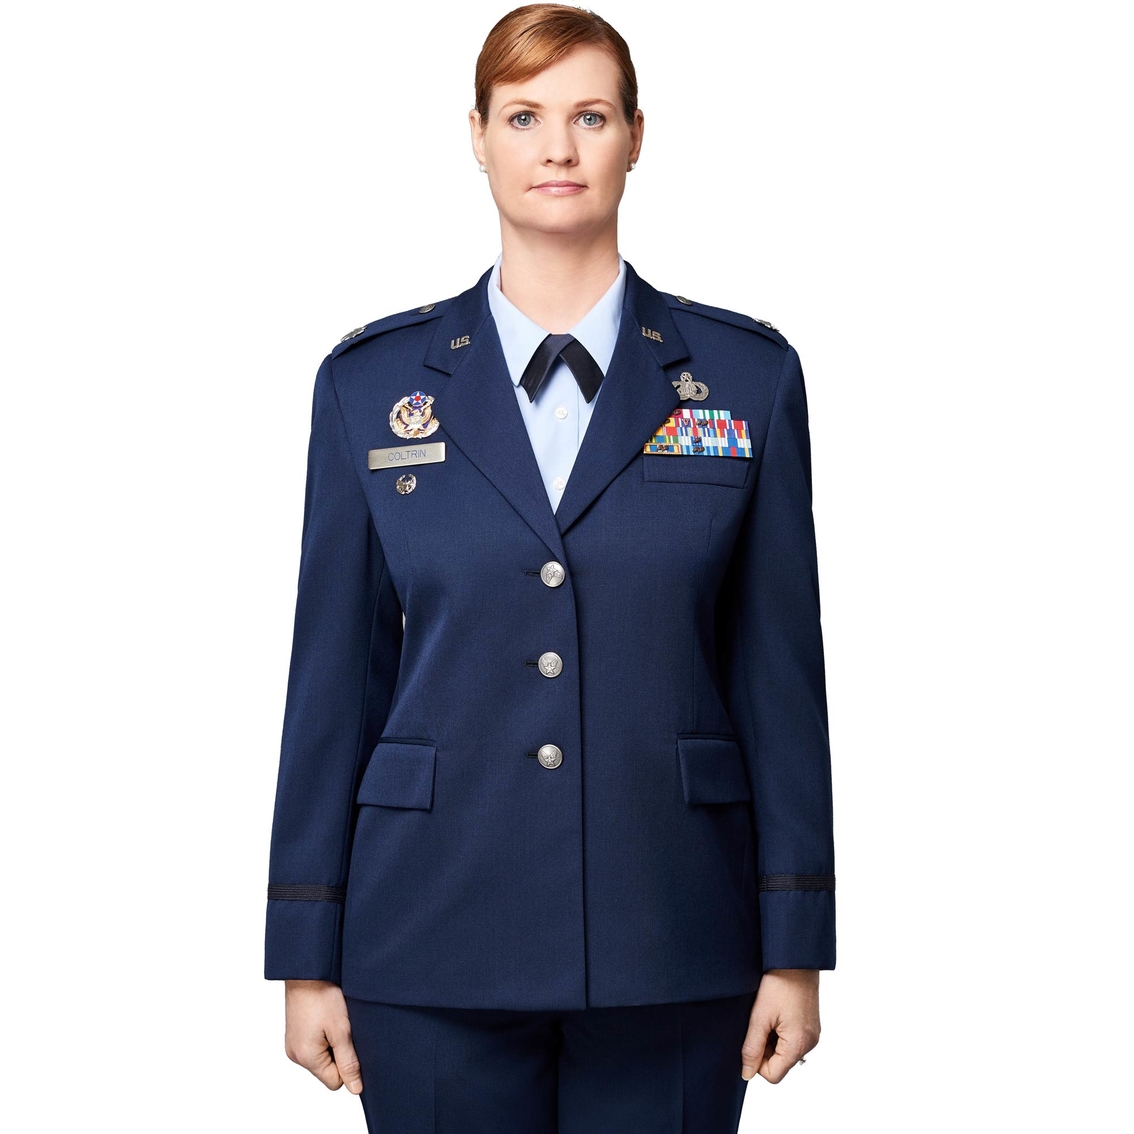 air force clothes and accessories